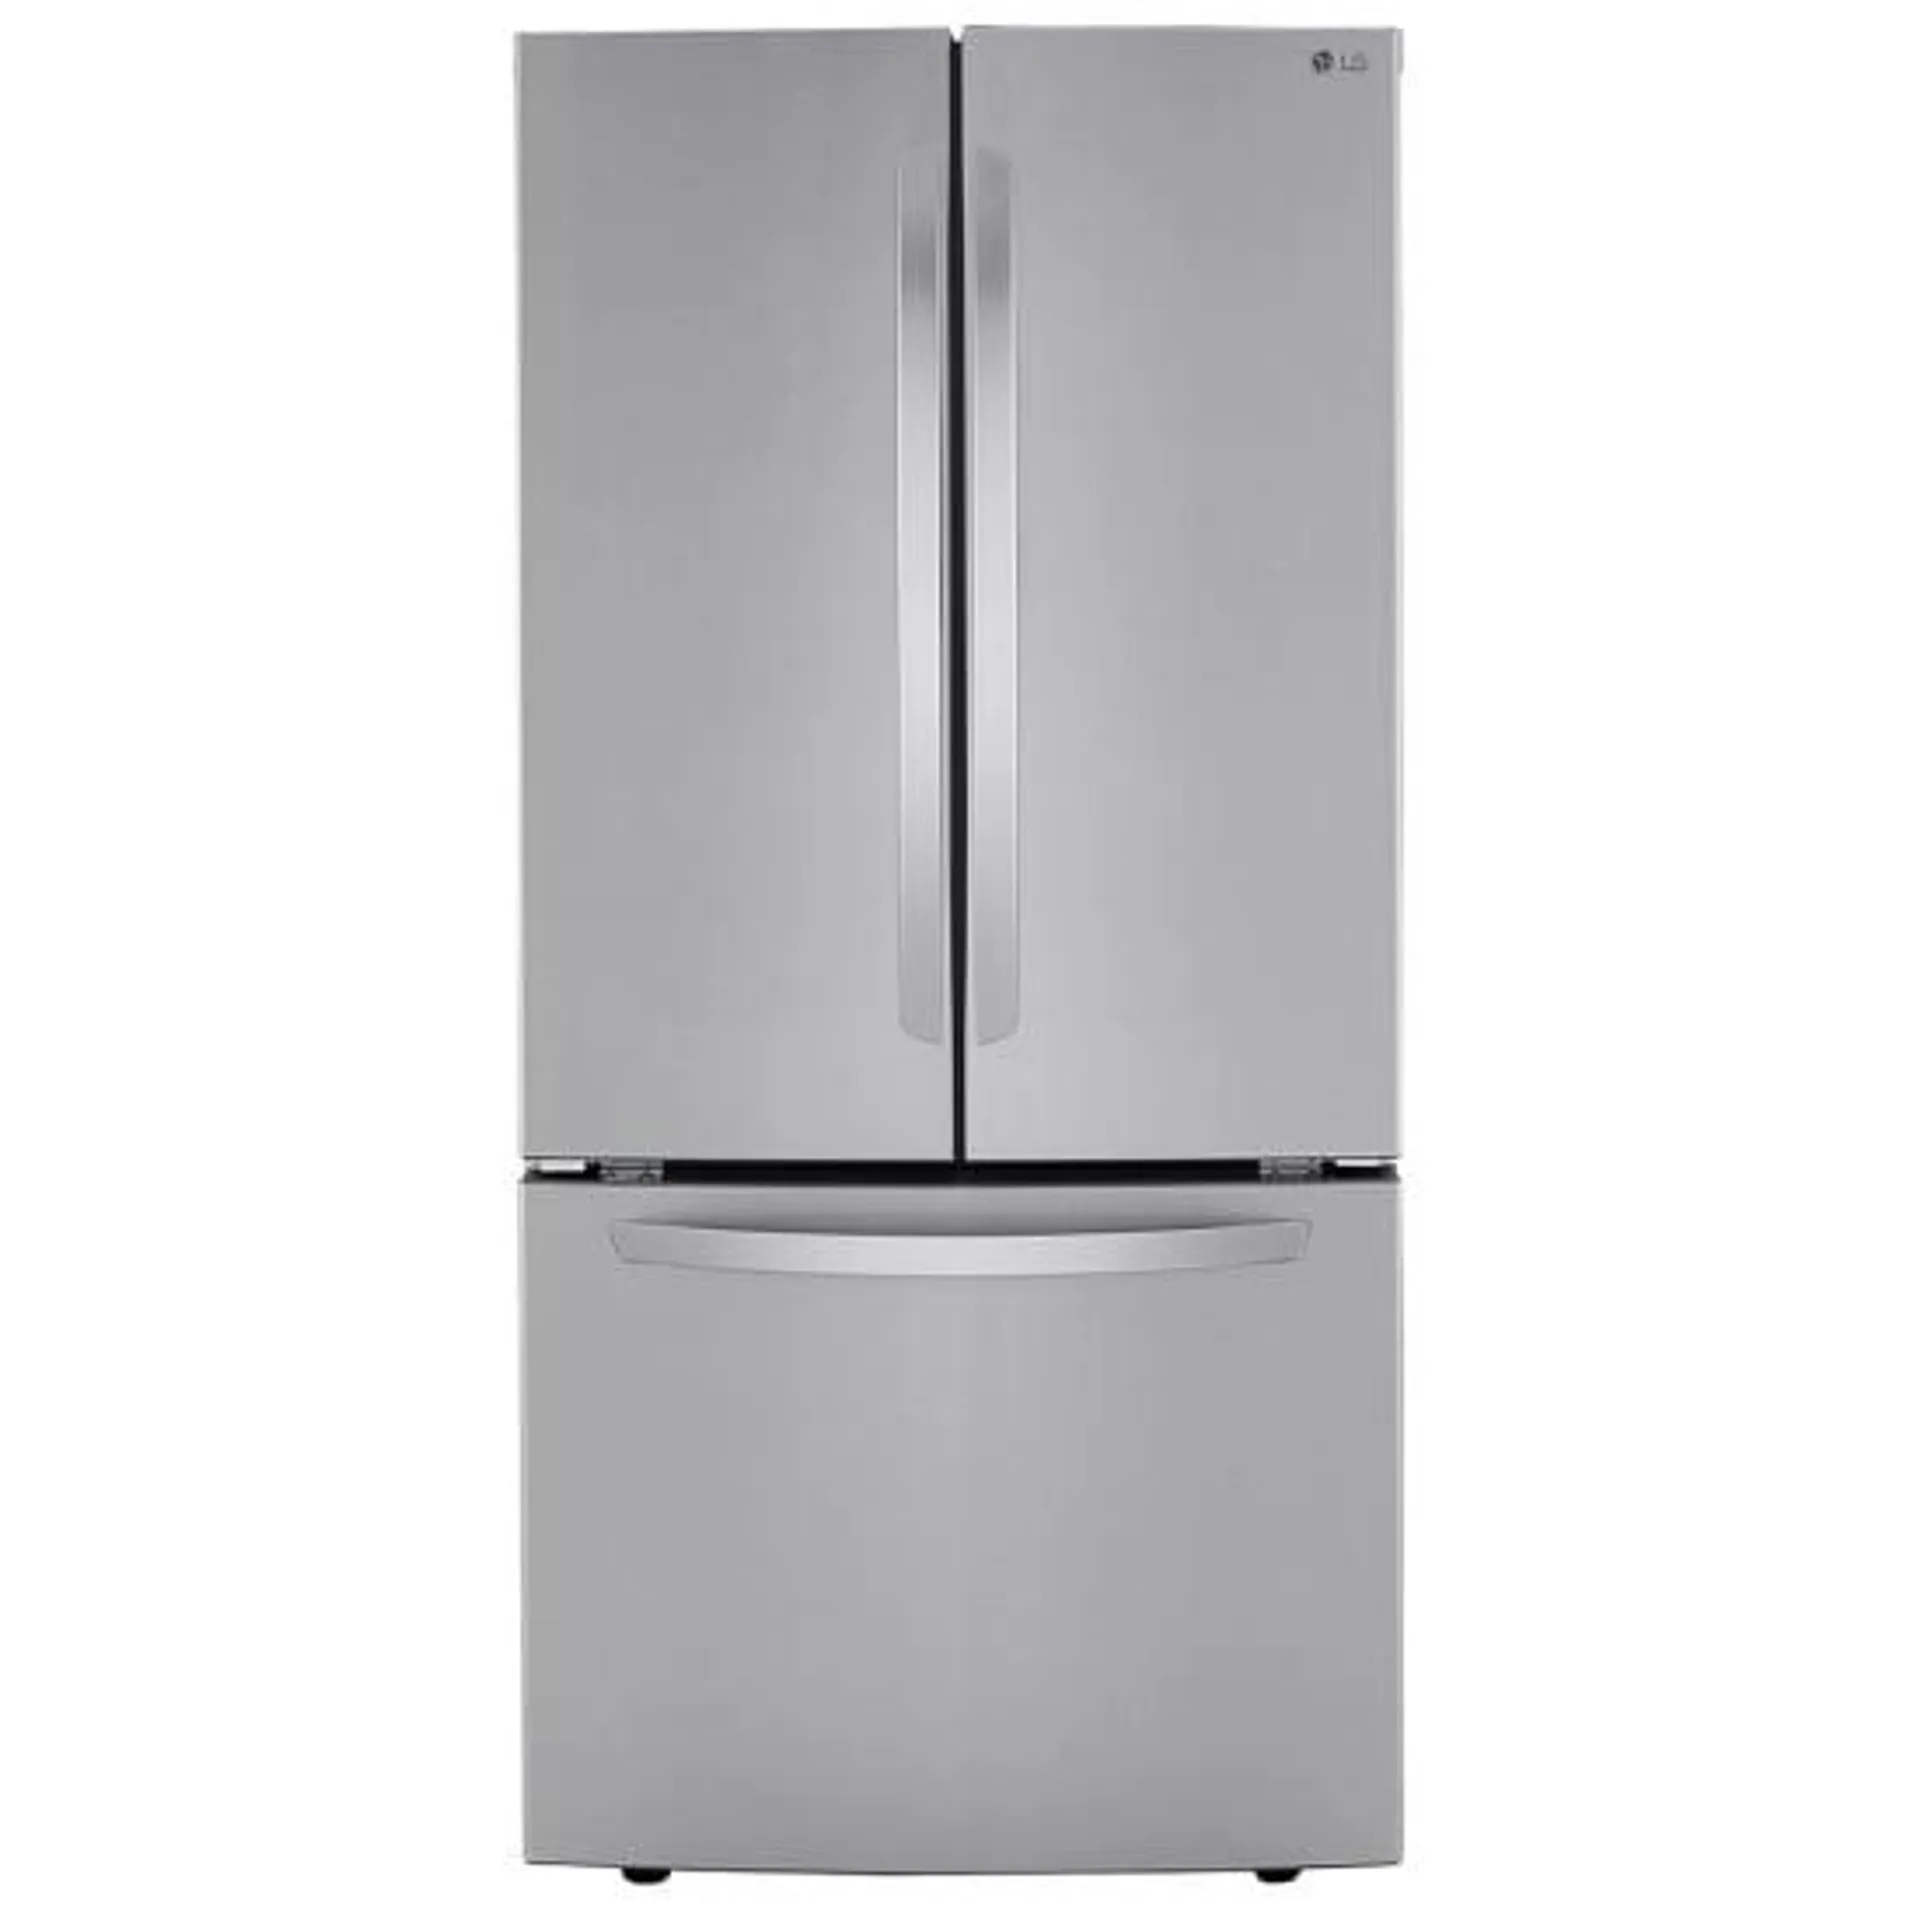 LG LRFCS2503S French Door Refrigerator, 33 inch Width, ENERGY STAR Certified, 25.1 cu. ft. Capacity, Stainless Steel colour Air Filter, Door Cooling+